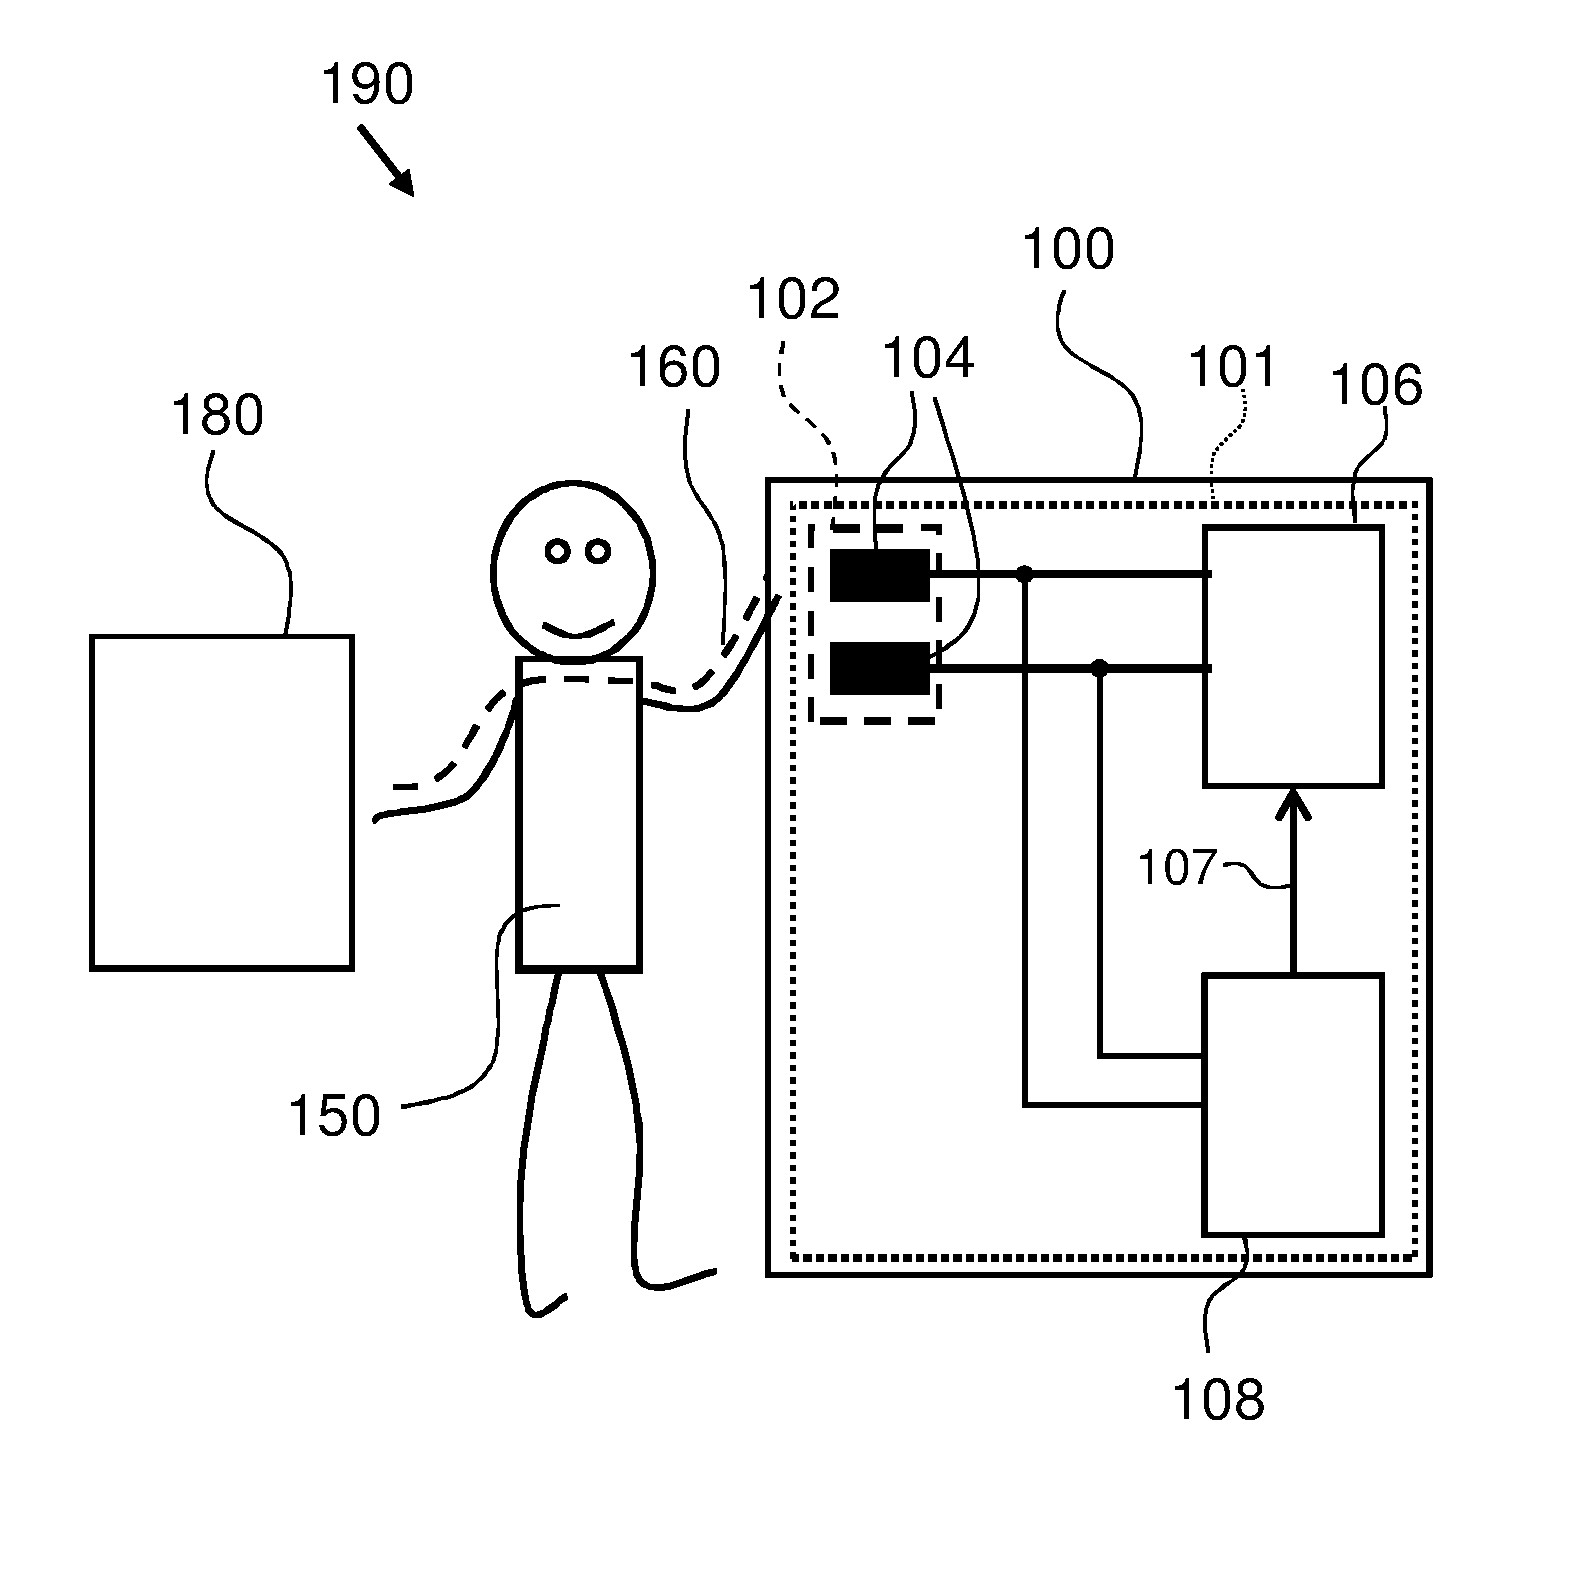 A receiver, transceiver, transceiver module for a body coupled communication device, a body coupled communication system and a method of waking-up a body coupled receiver of a body coupled communication device